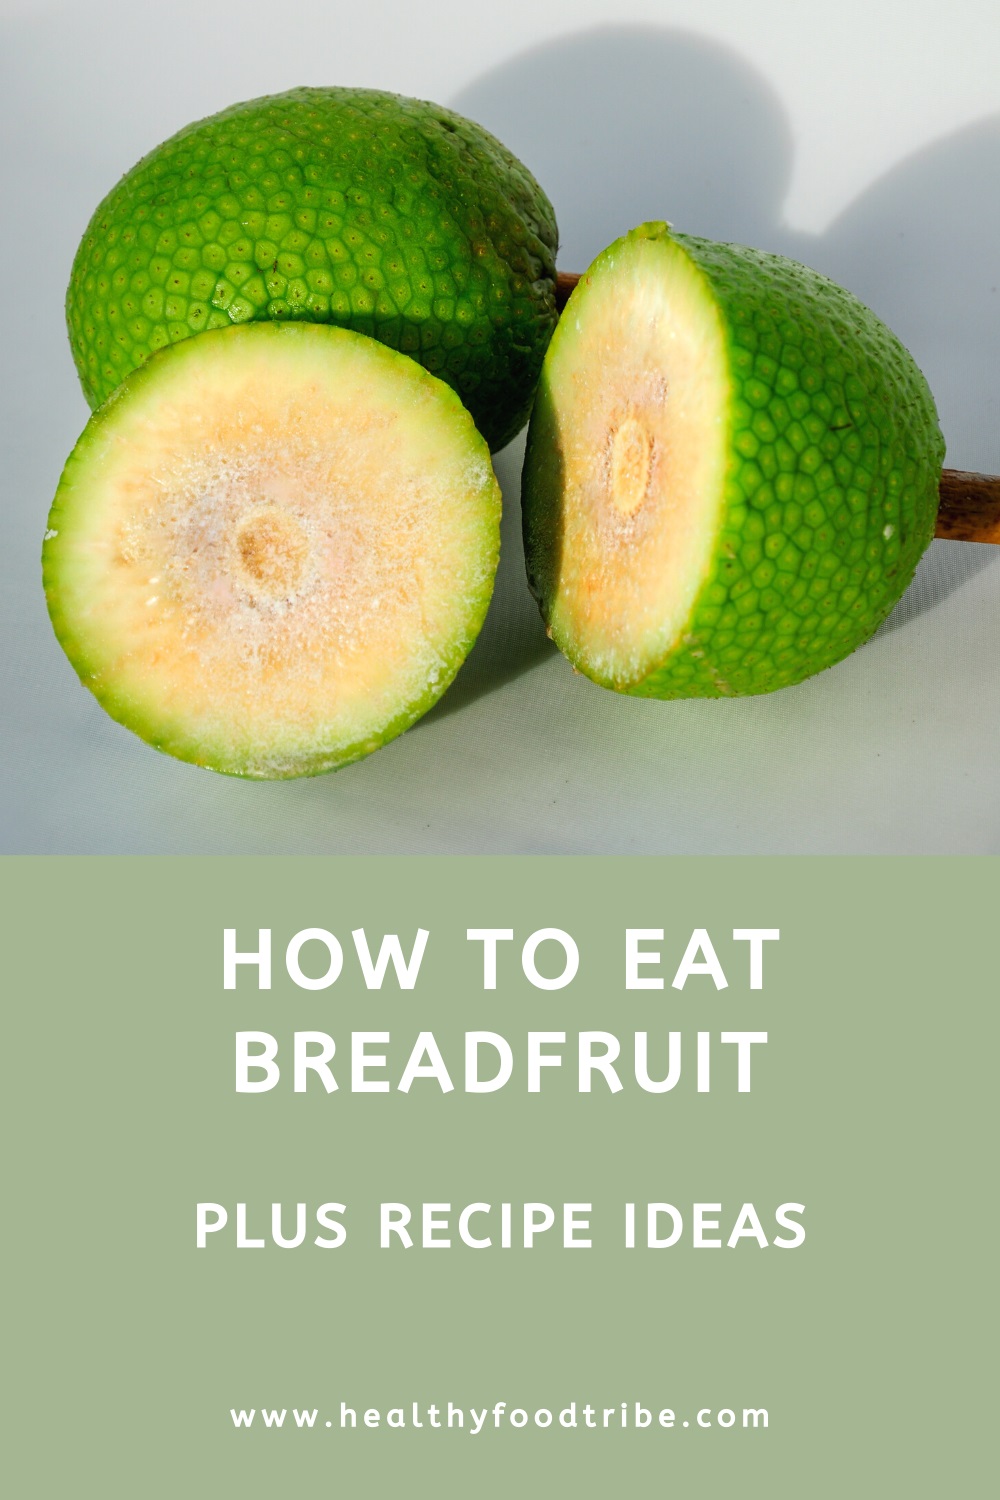 How to cut and eat breadfruit (plus recipe ideas)